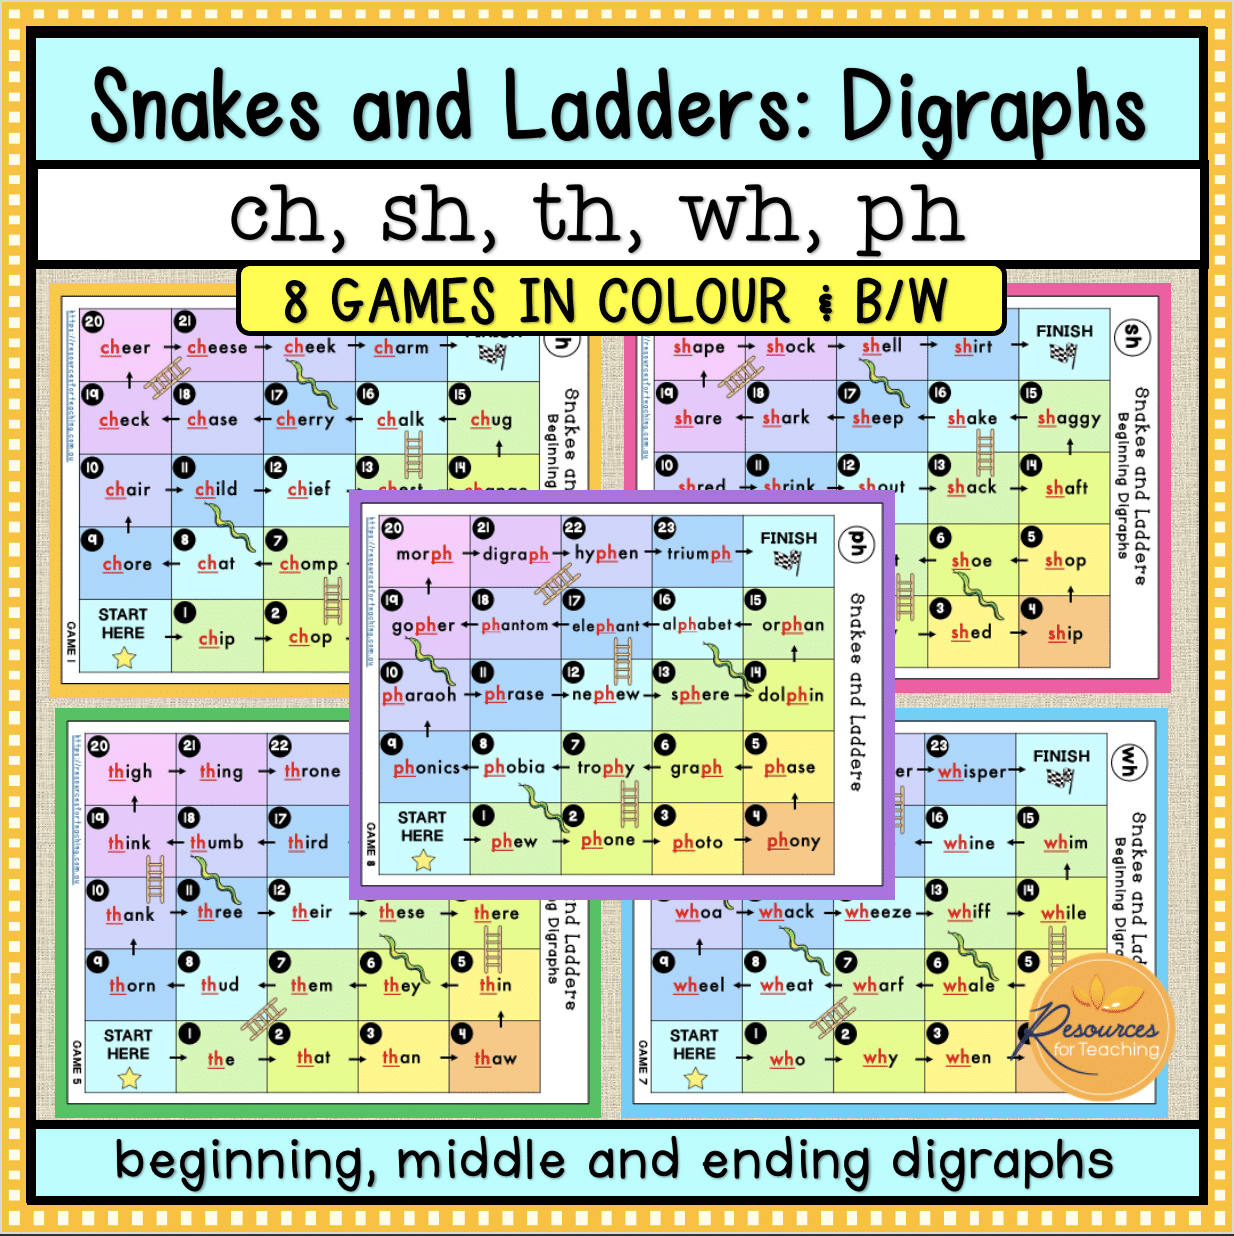 Snakes and ladders digraph games resources for teaching stralia